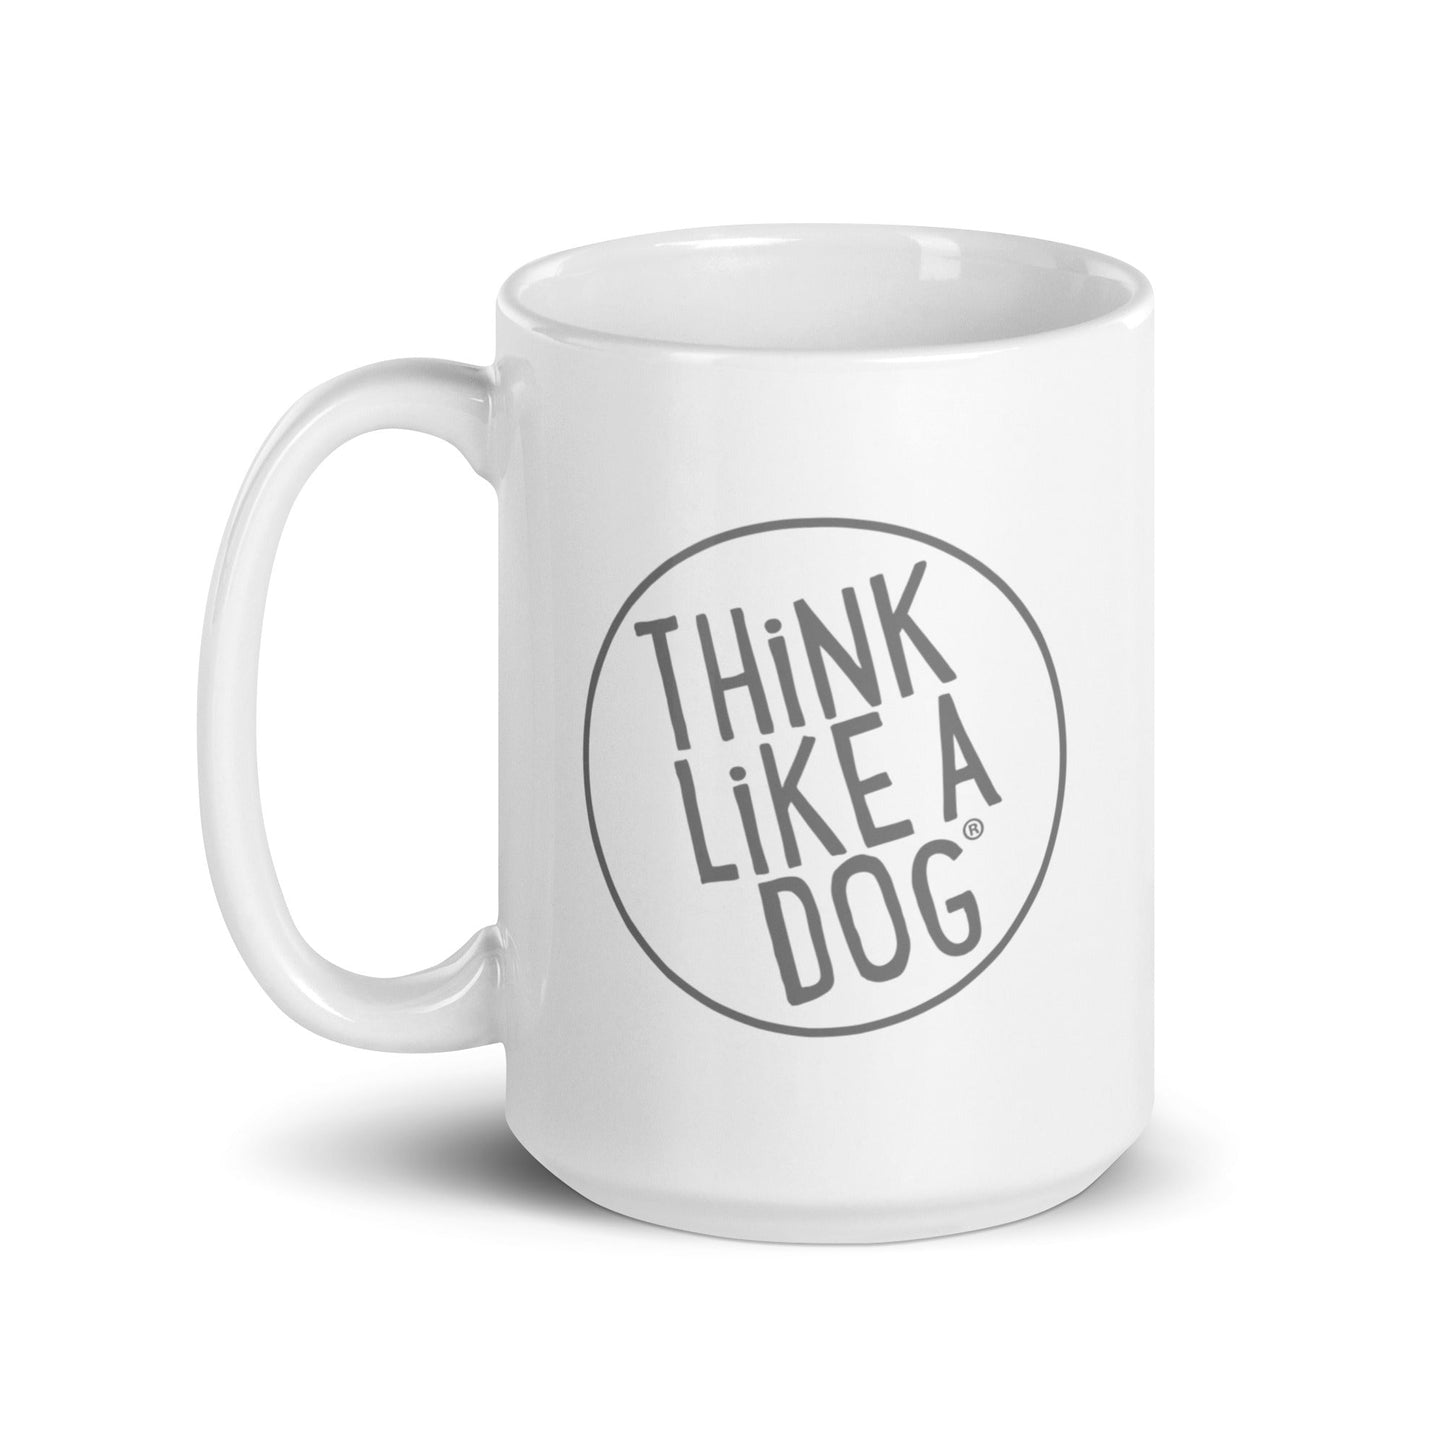 A THiNK LiKE A DOG® white glossy mug with the phrase "Think Like a Dog" printed on it for dog lovers.